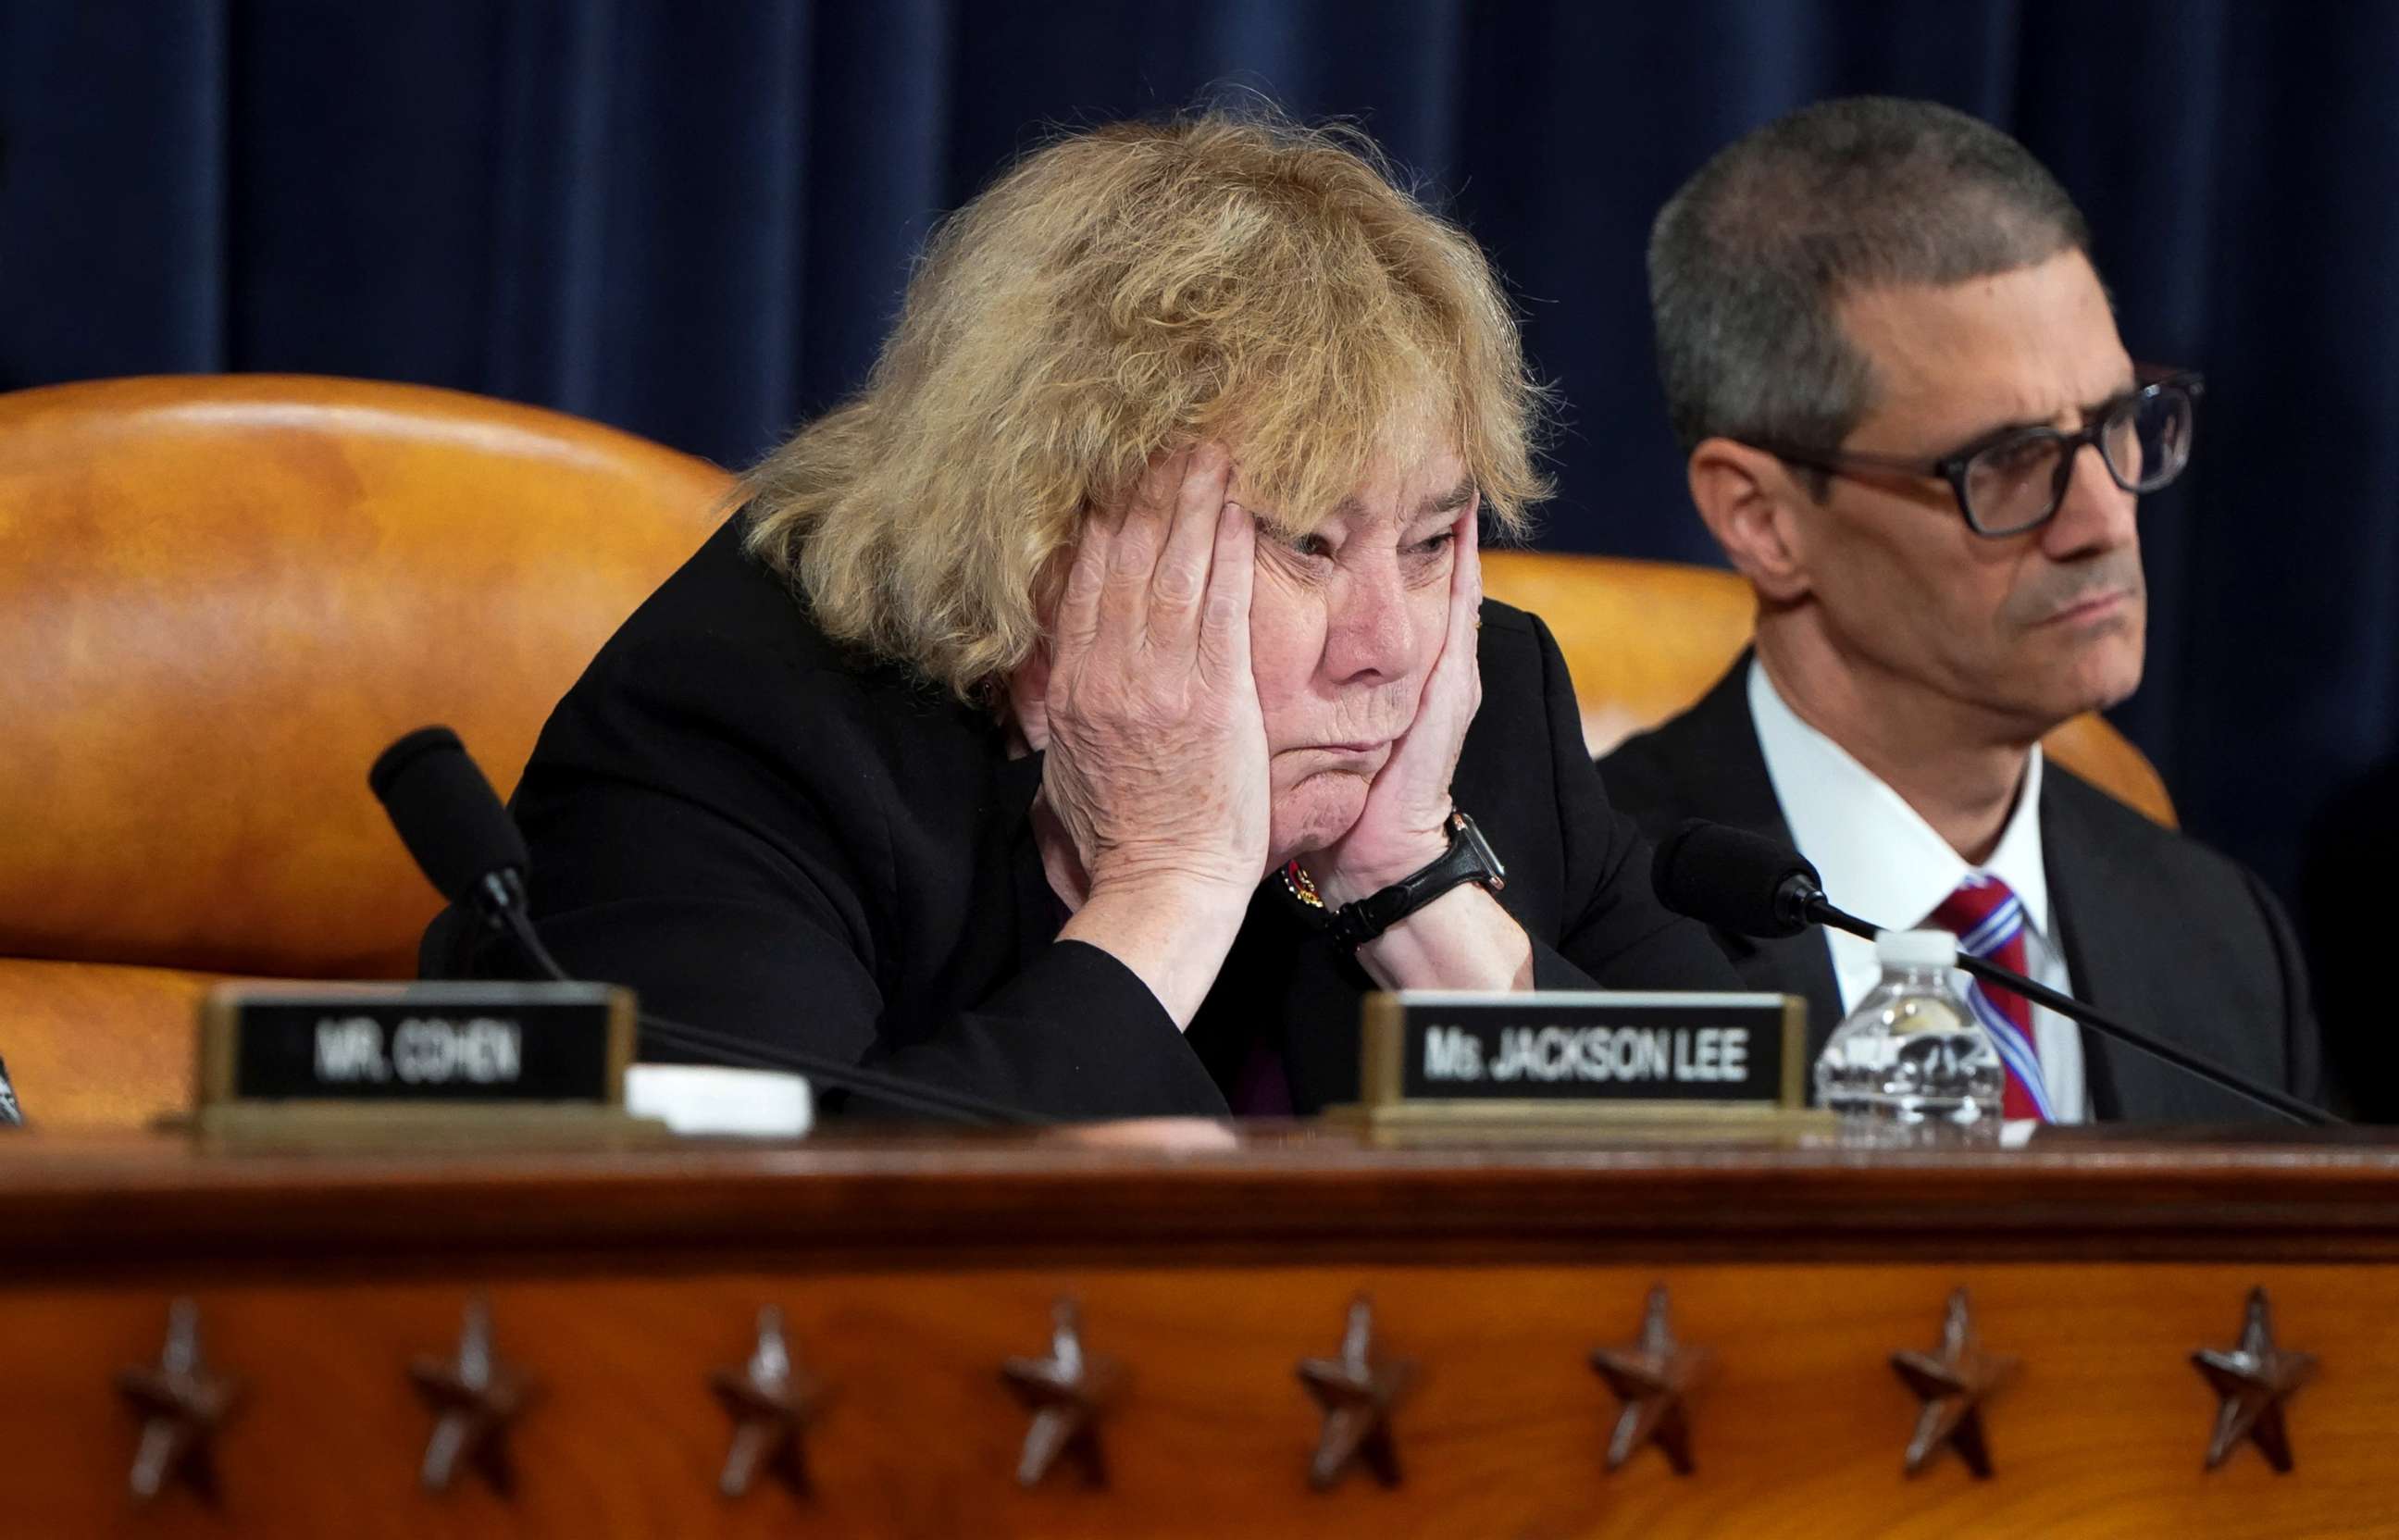 PHOTO: House Judiciary Committee member Rep. Zoe Lofgren (D-CA) puts her head in her hands as she listens as the House Judiciary Committee continues its markup of articles of impeachment against President Trump in Washington, D.C. Dec. 12, 2019.